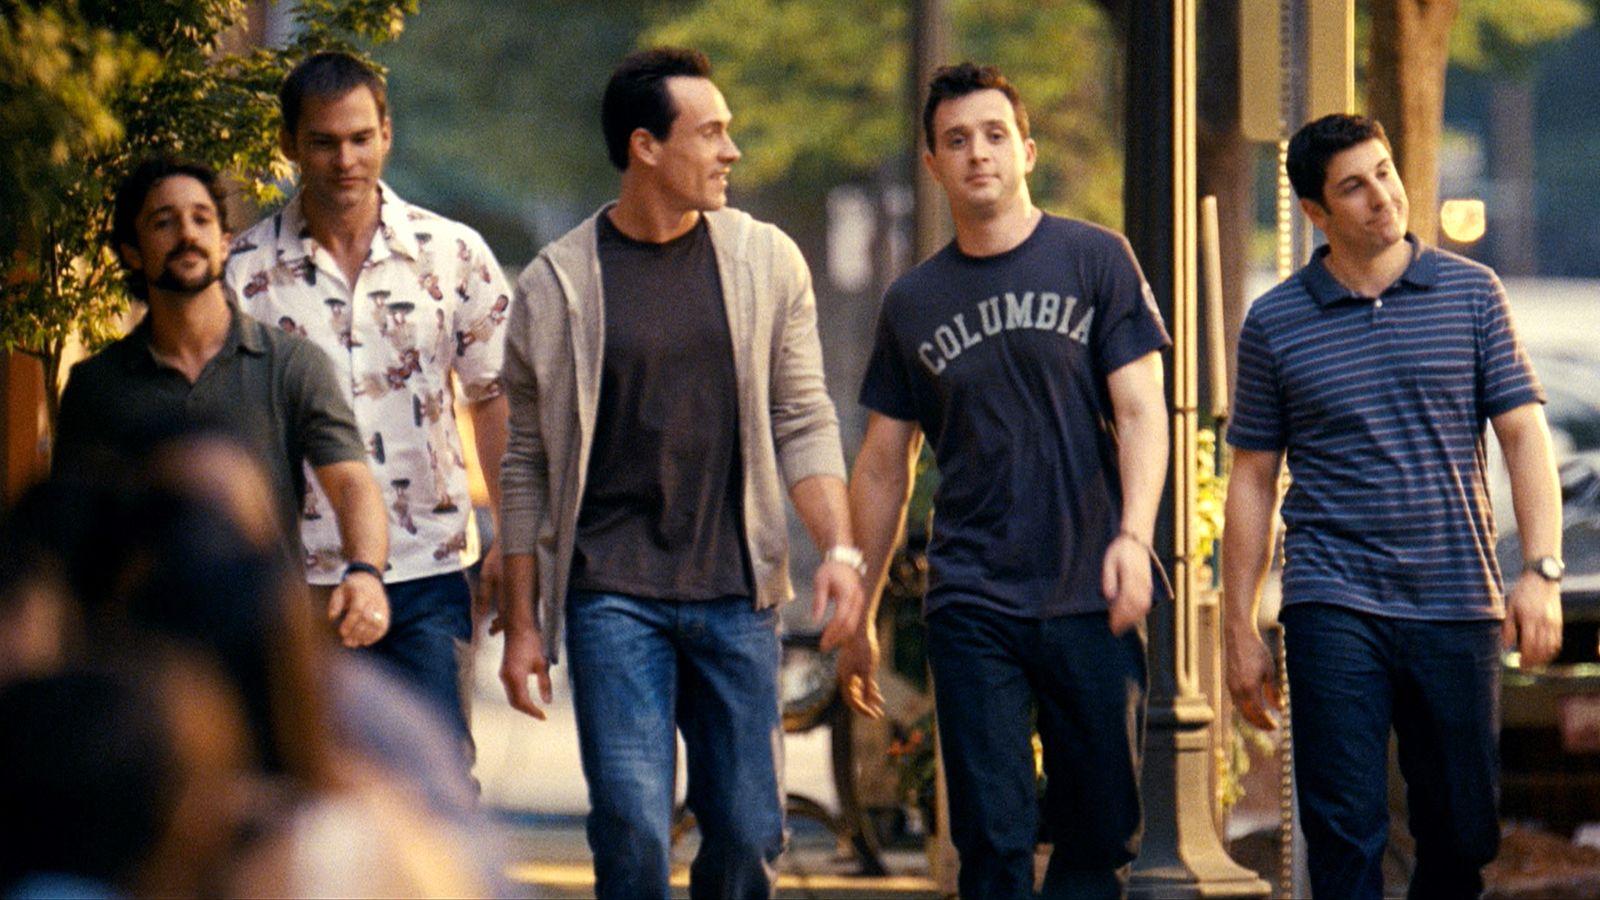 American Reunion Vicky Picture to